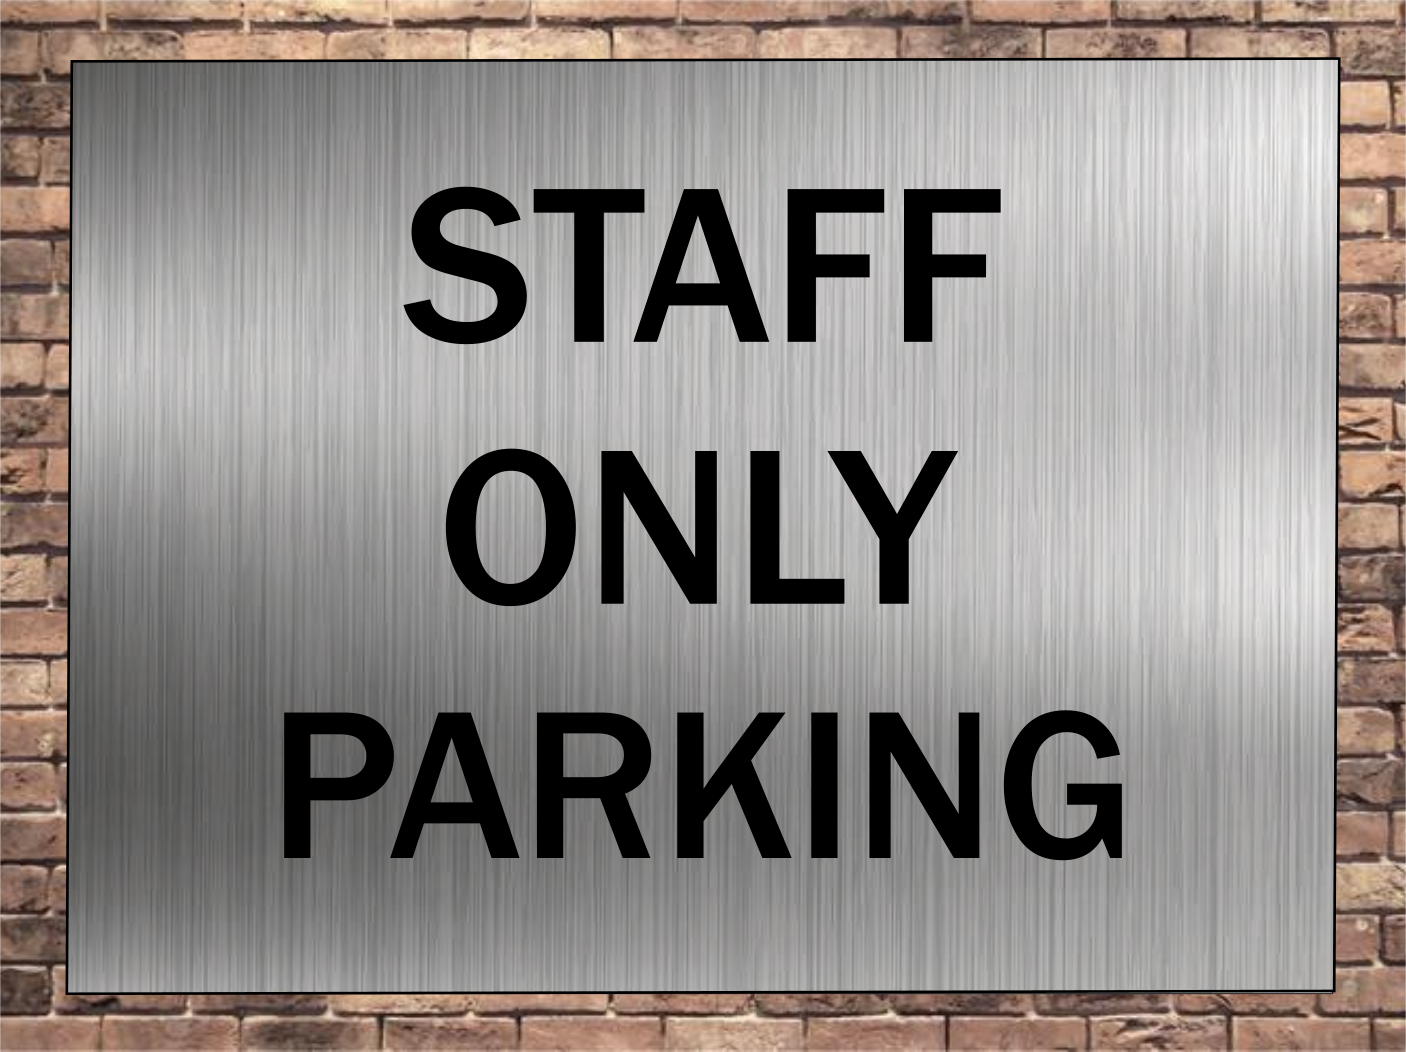 Staff Only Parking Signs